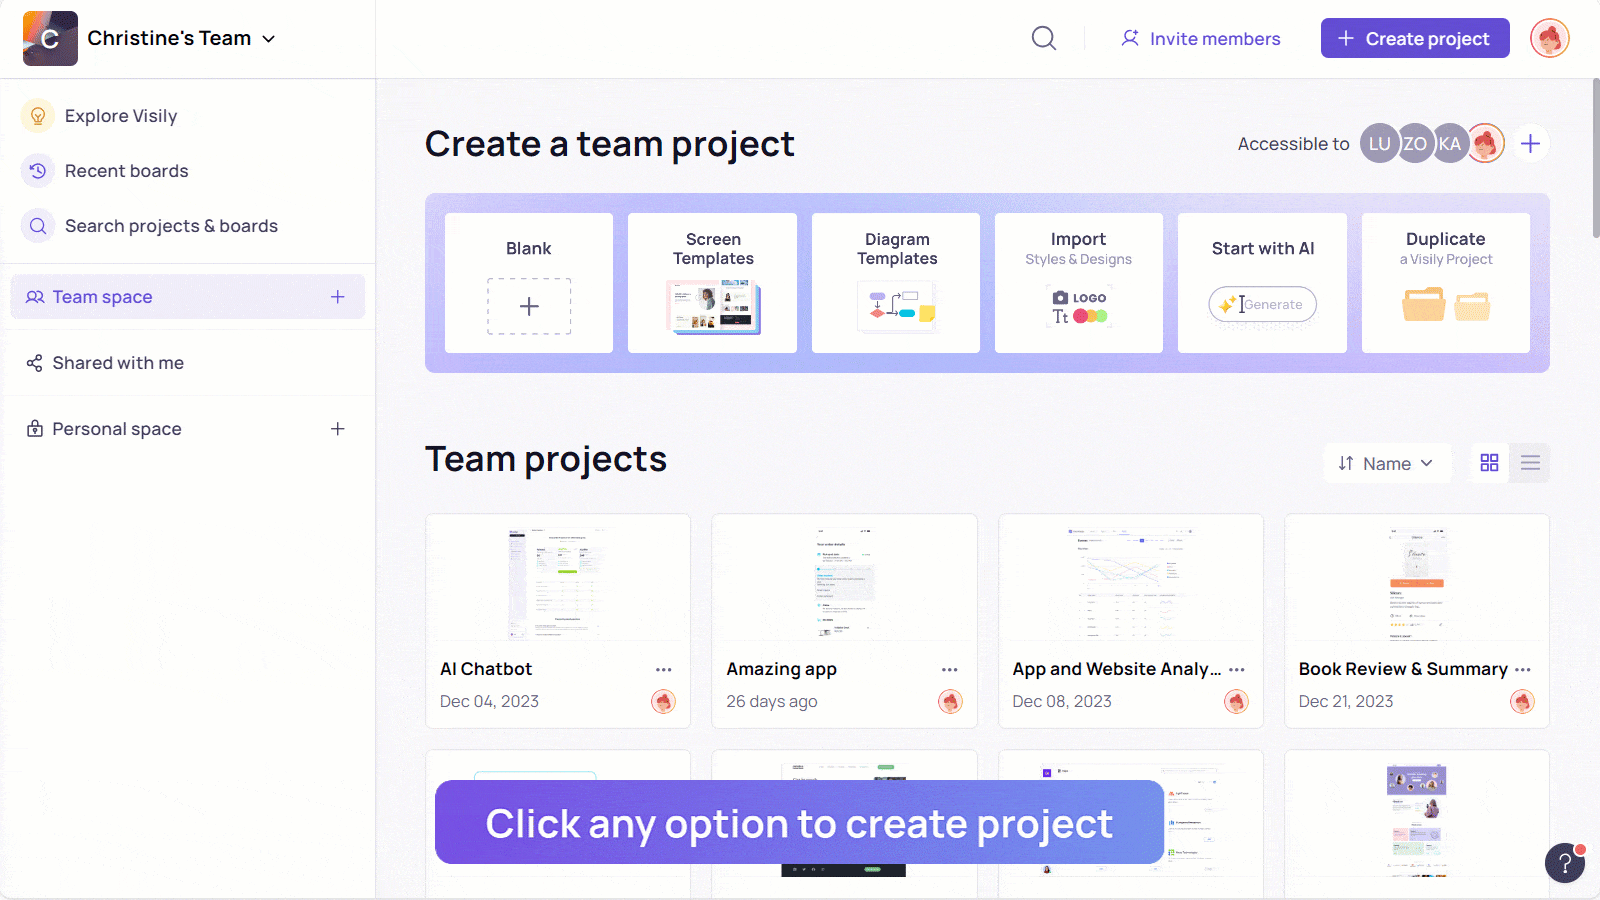 Where to create projects 1 min